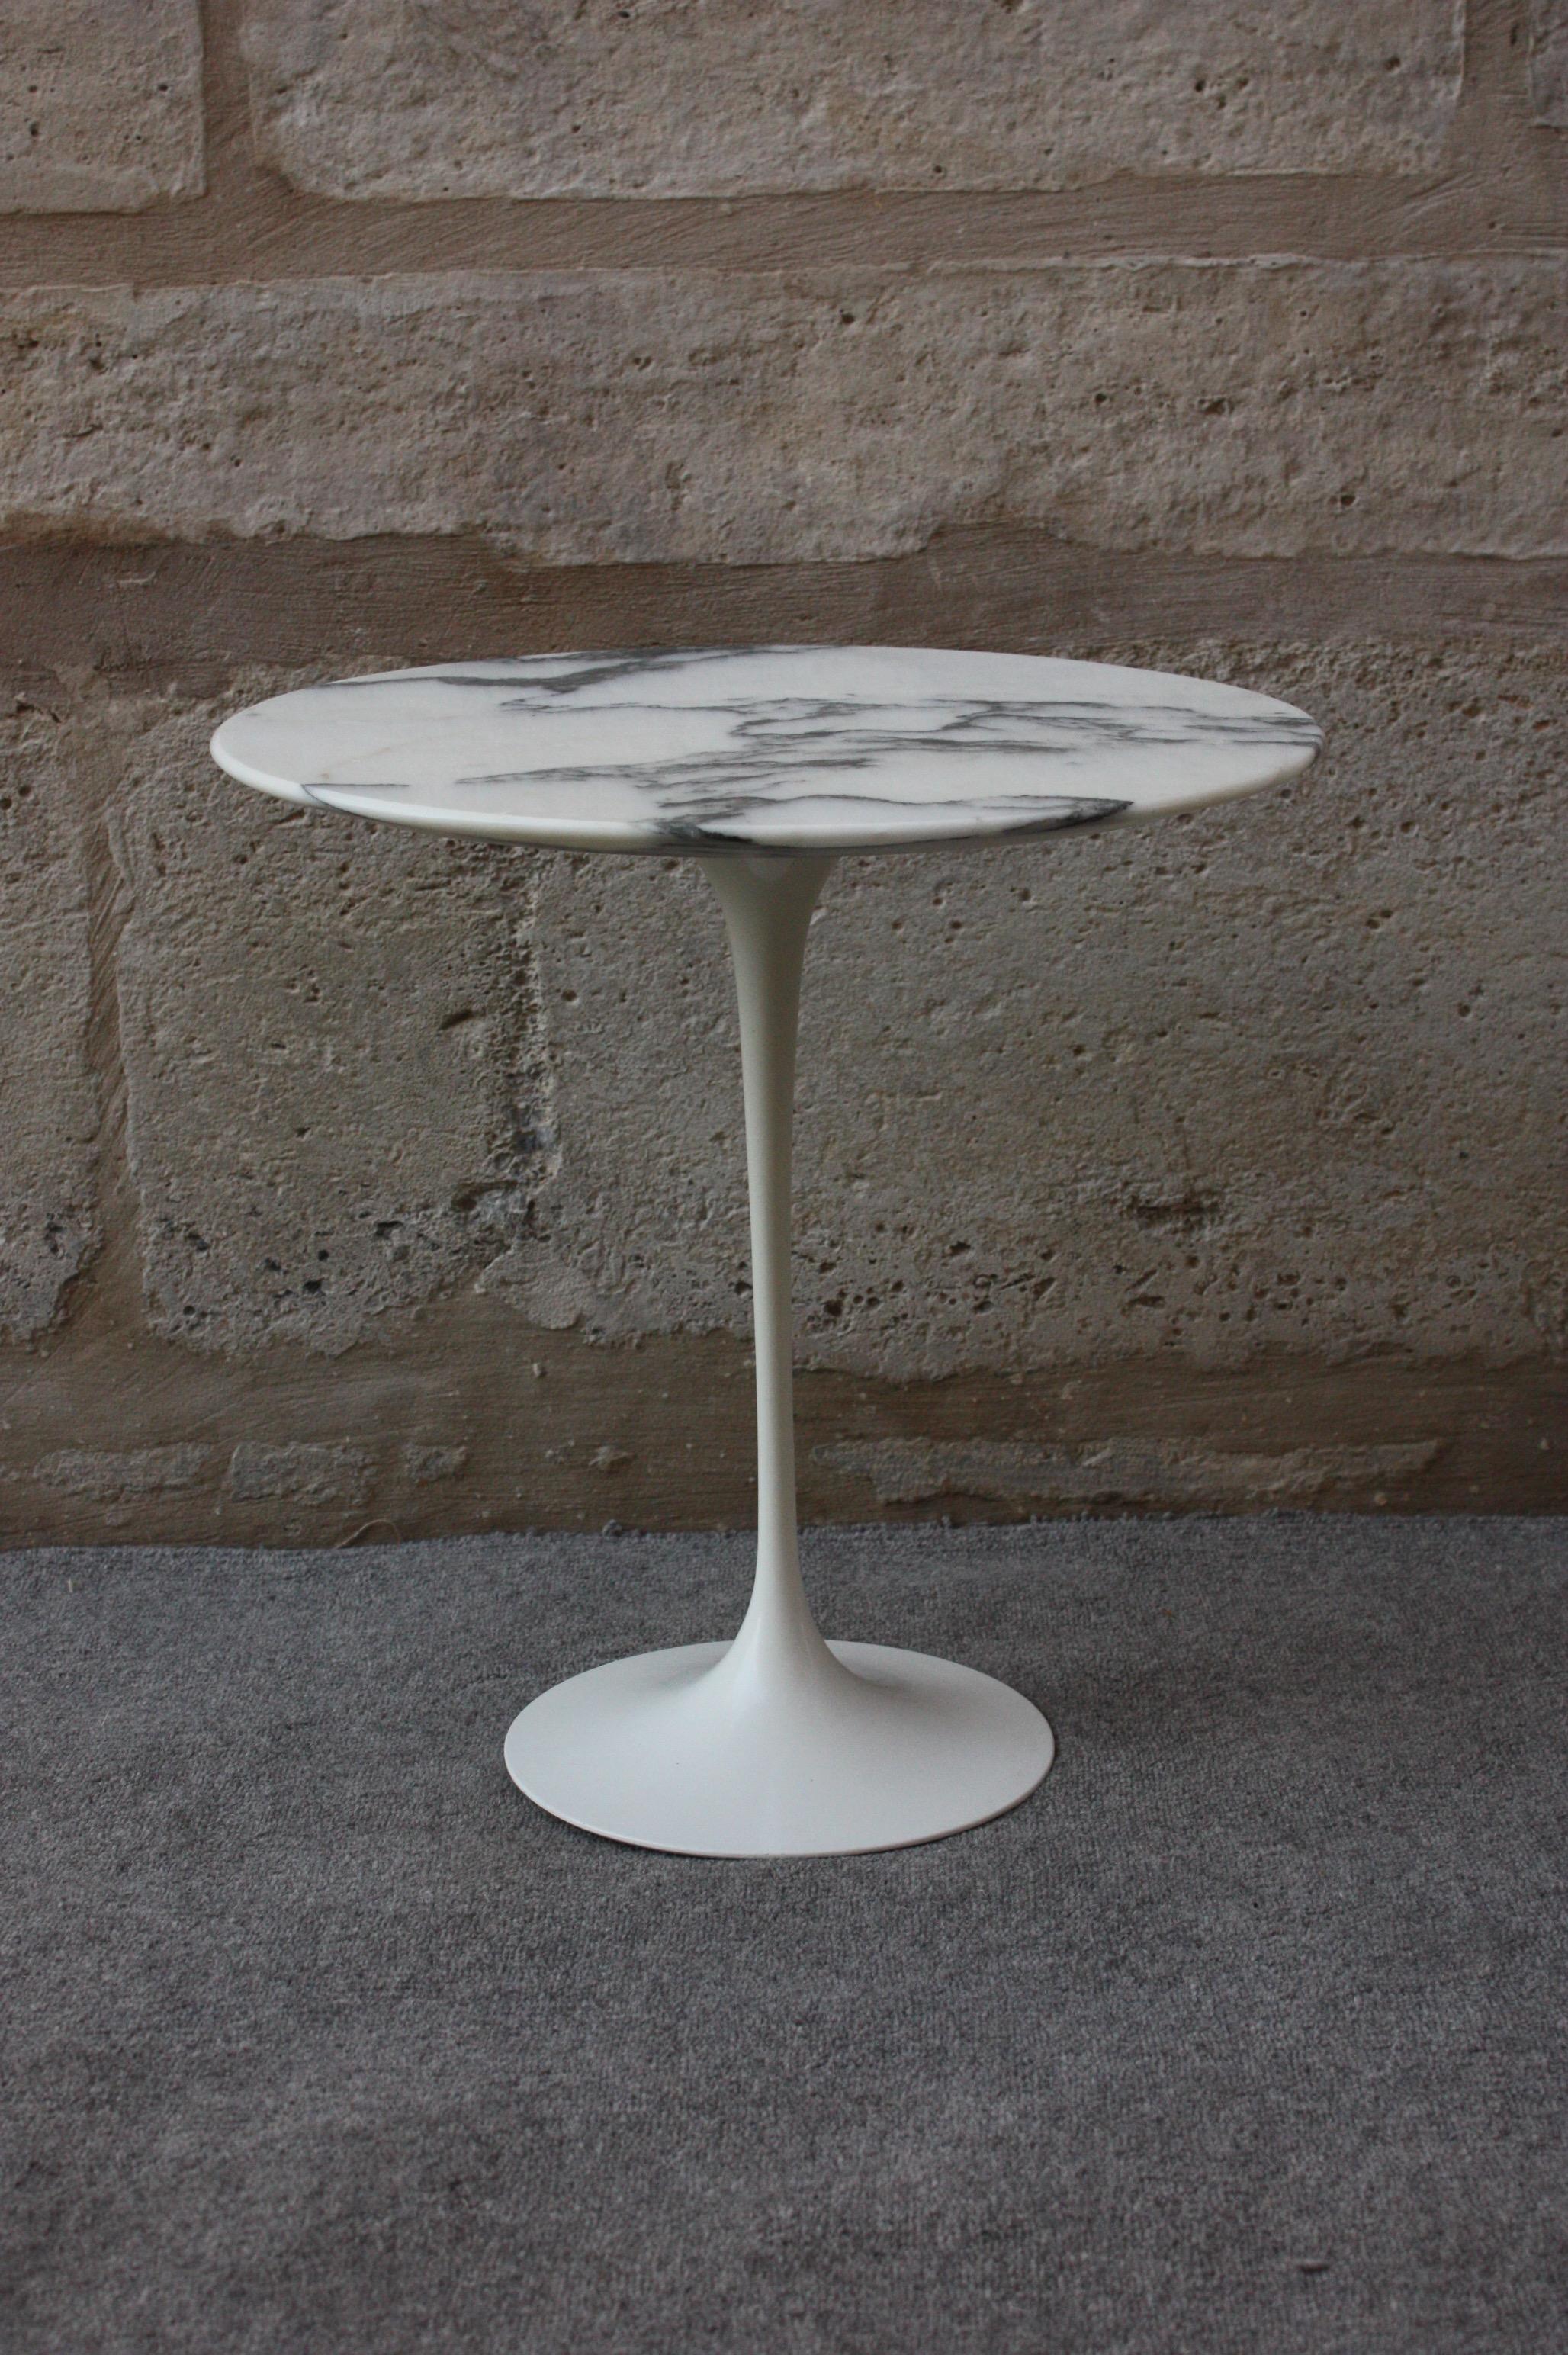 Eero Saarinen (1910–1961)
Tulip side table, circa 1960
Circular white marble top, lacquered aluminum support
Stamped 